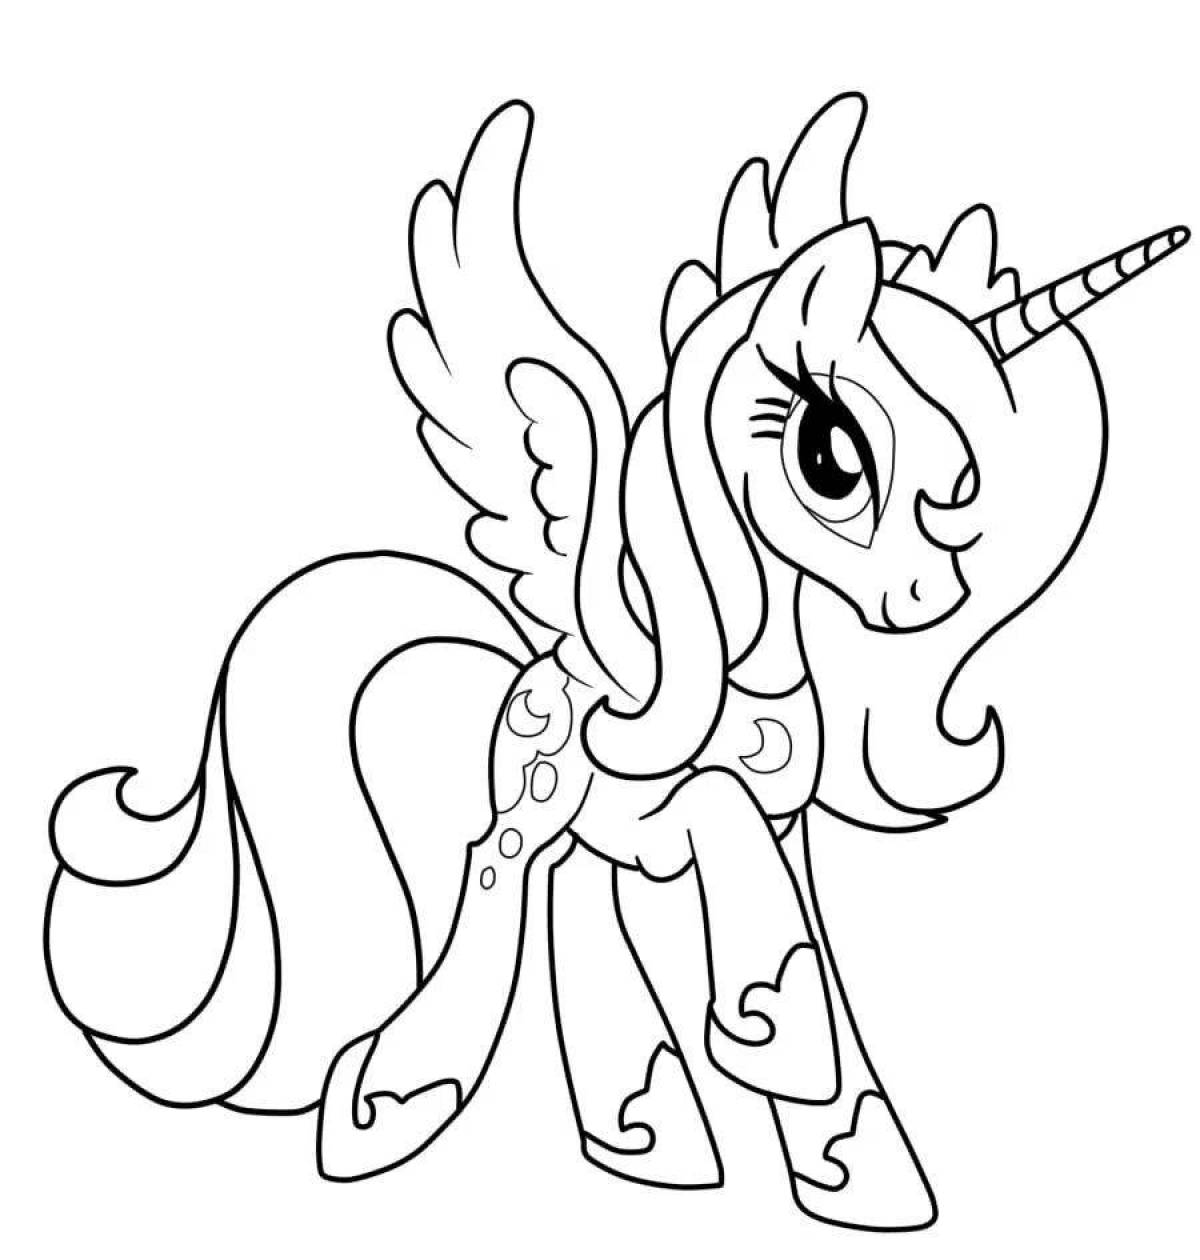 Brilliant ponyville pony coloring page